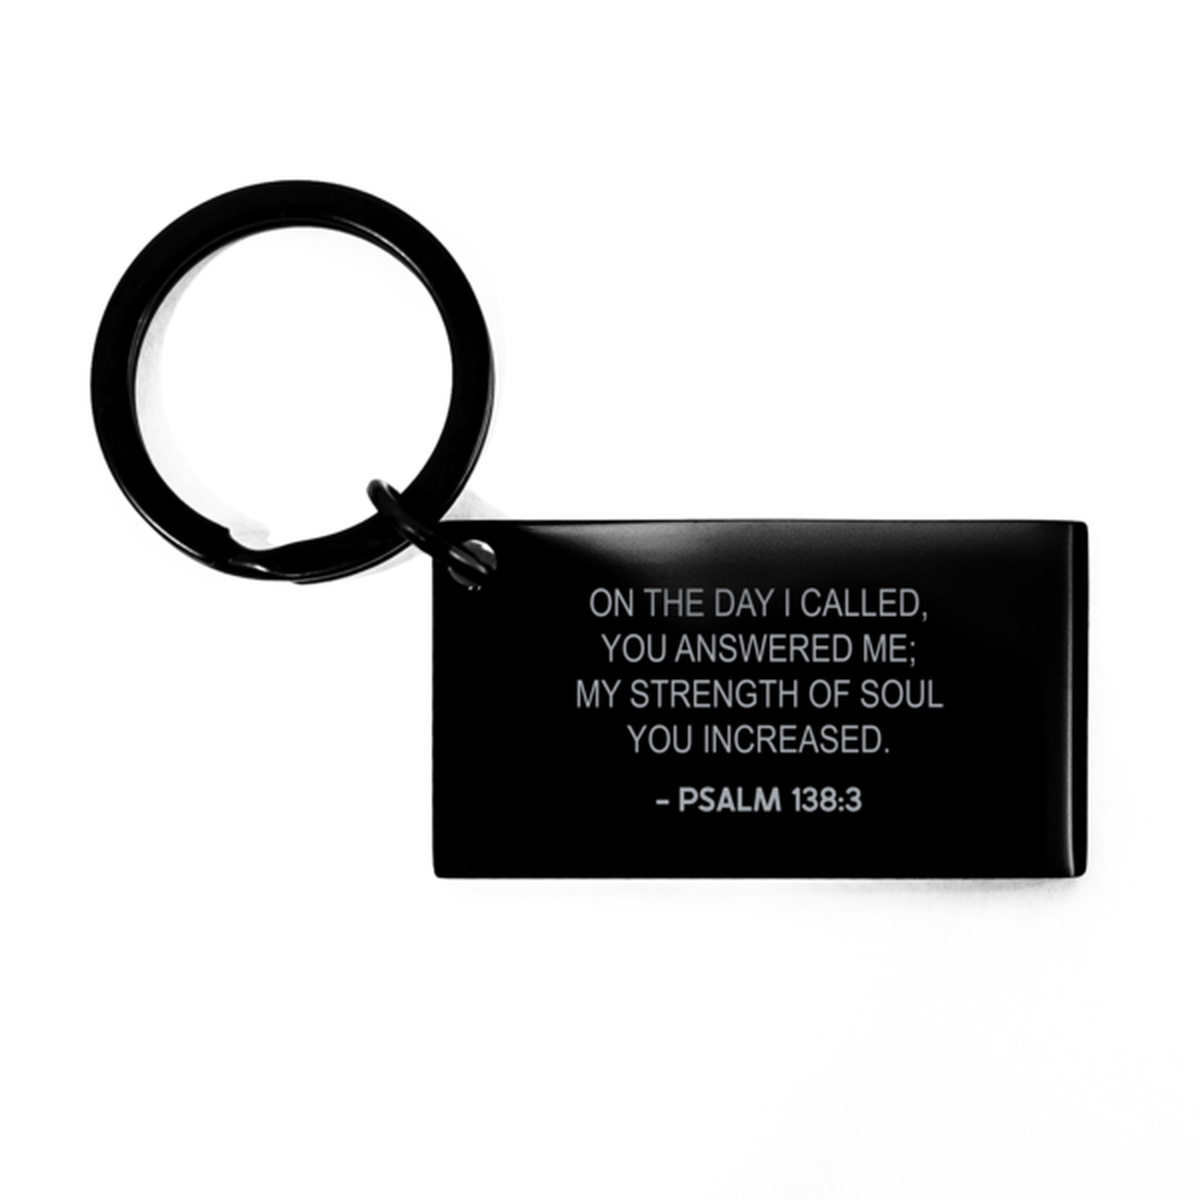 Bible Verse Black Keychain, Psalm 138:3 On The Day I Called You Answered Me My Strength, Christian Inspirational Key Ring Gifts For Men Women